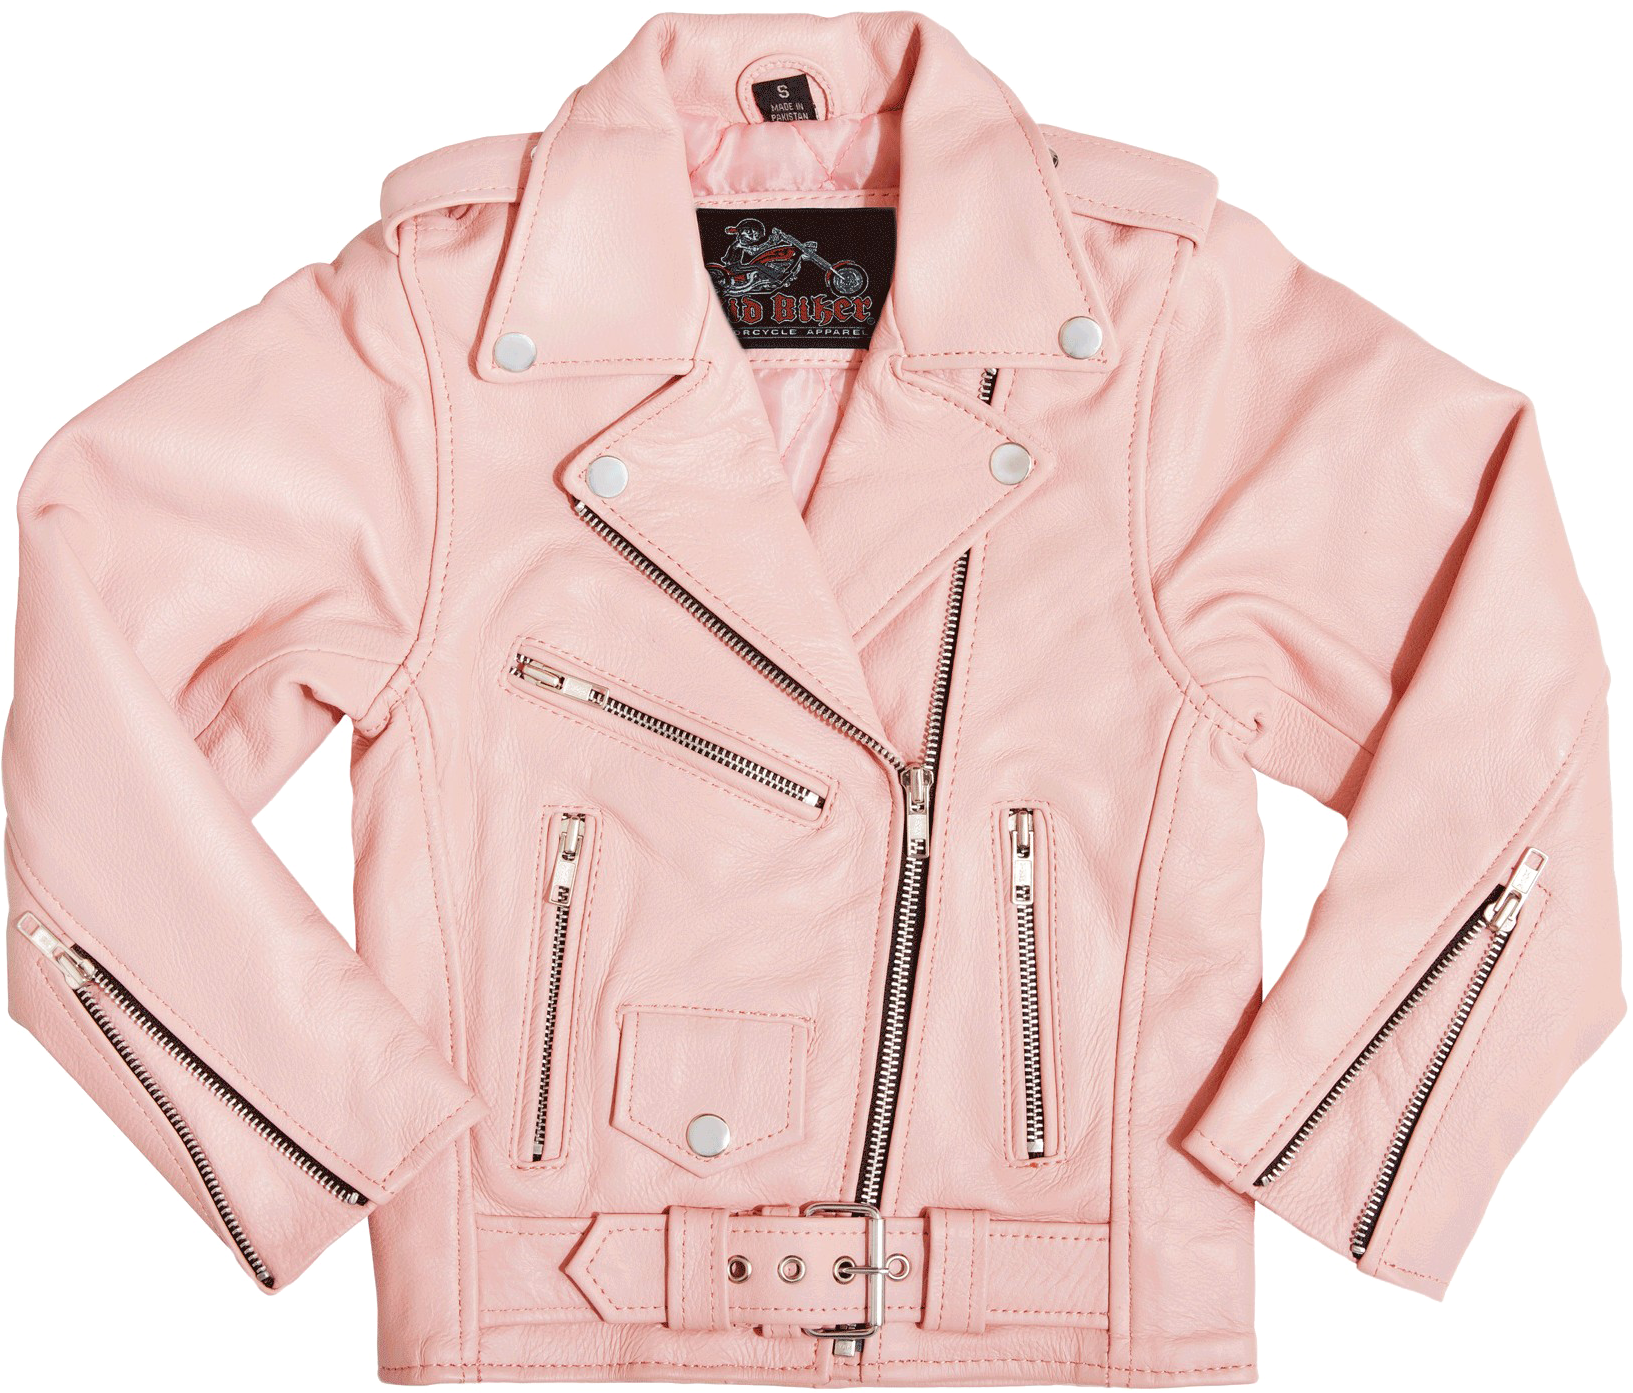 A Pink Leather Jacket With A Black Background